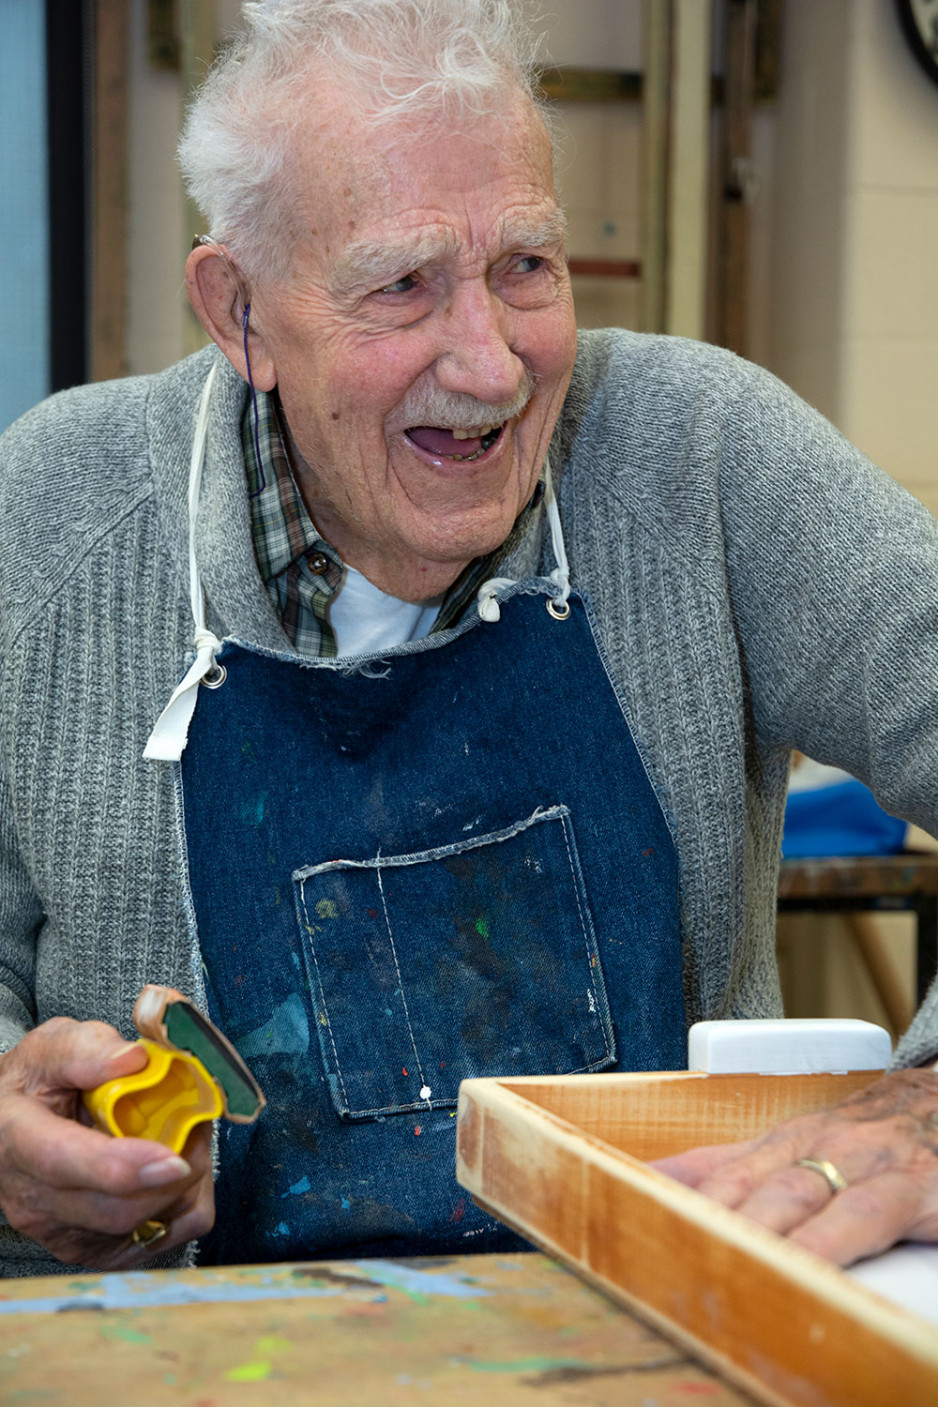 Veteran Charles Astles smiling as he sands a woodworking project by hand